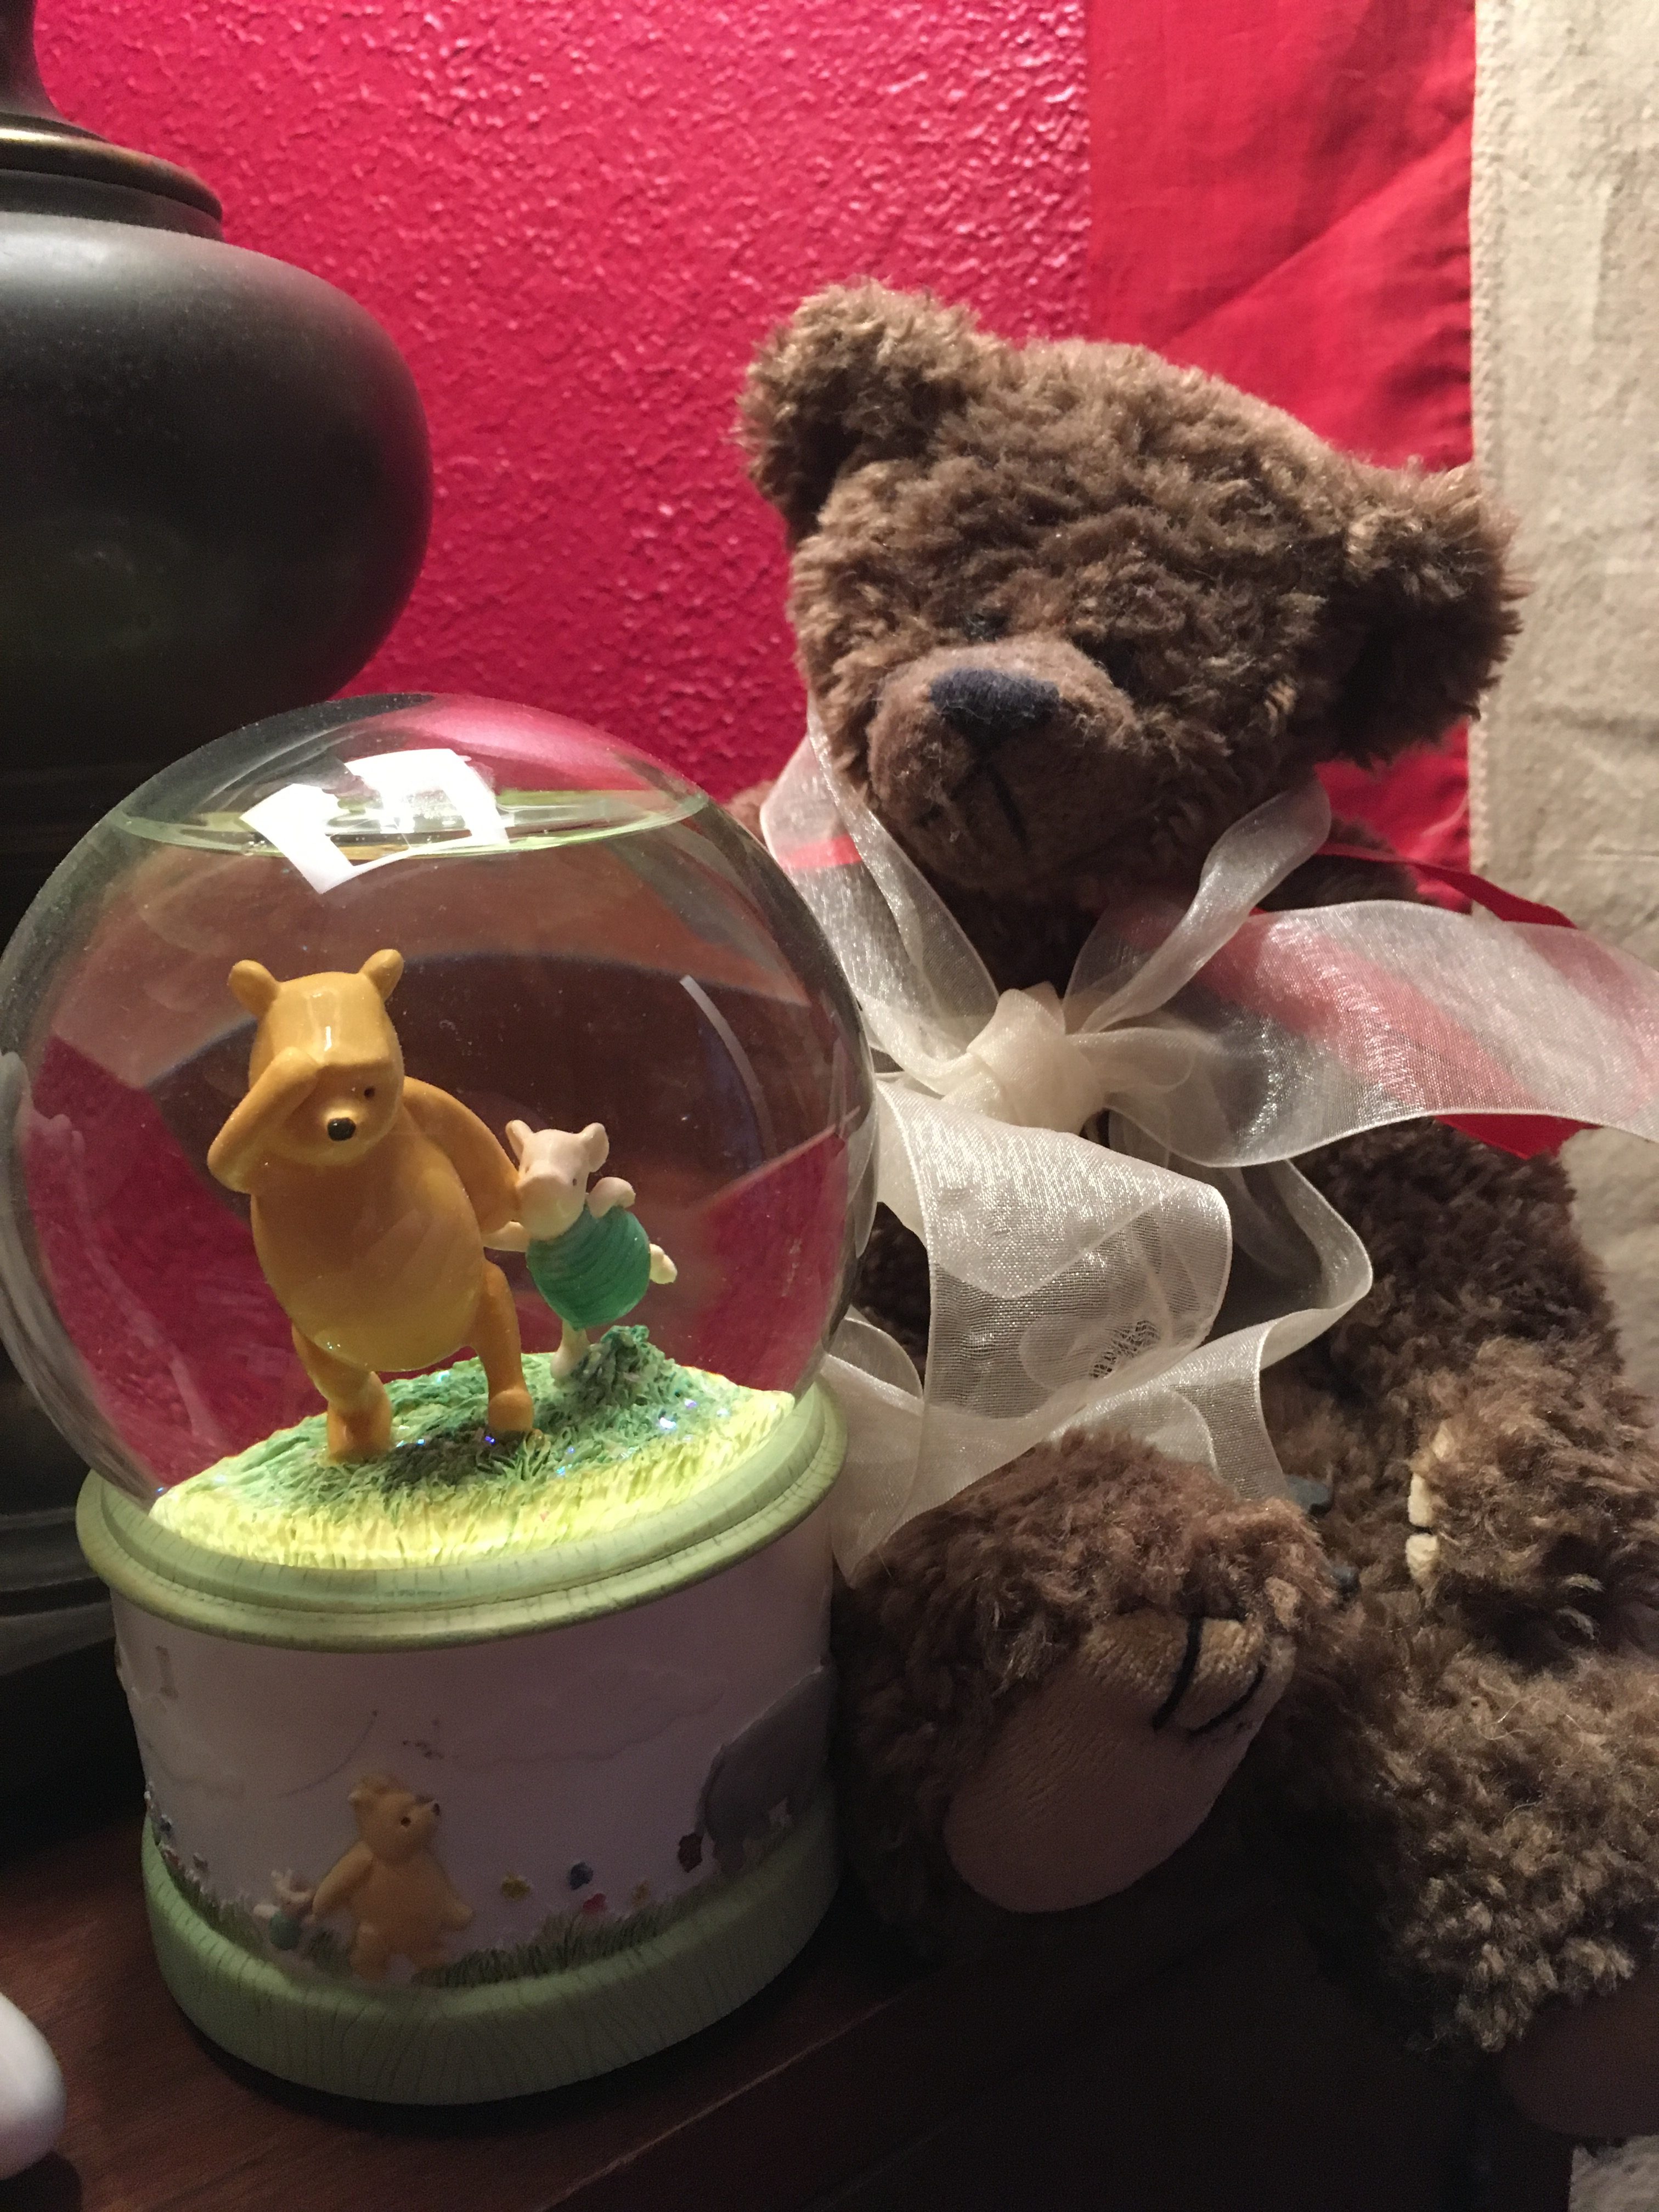 Read more about the article Ceiling Fans And Teddy Bears